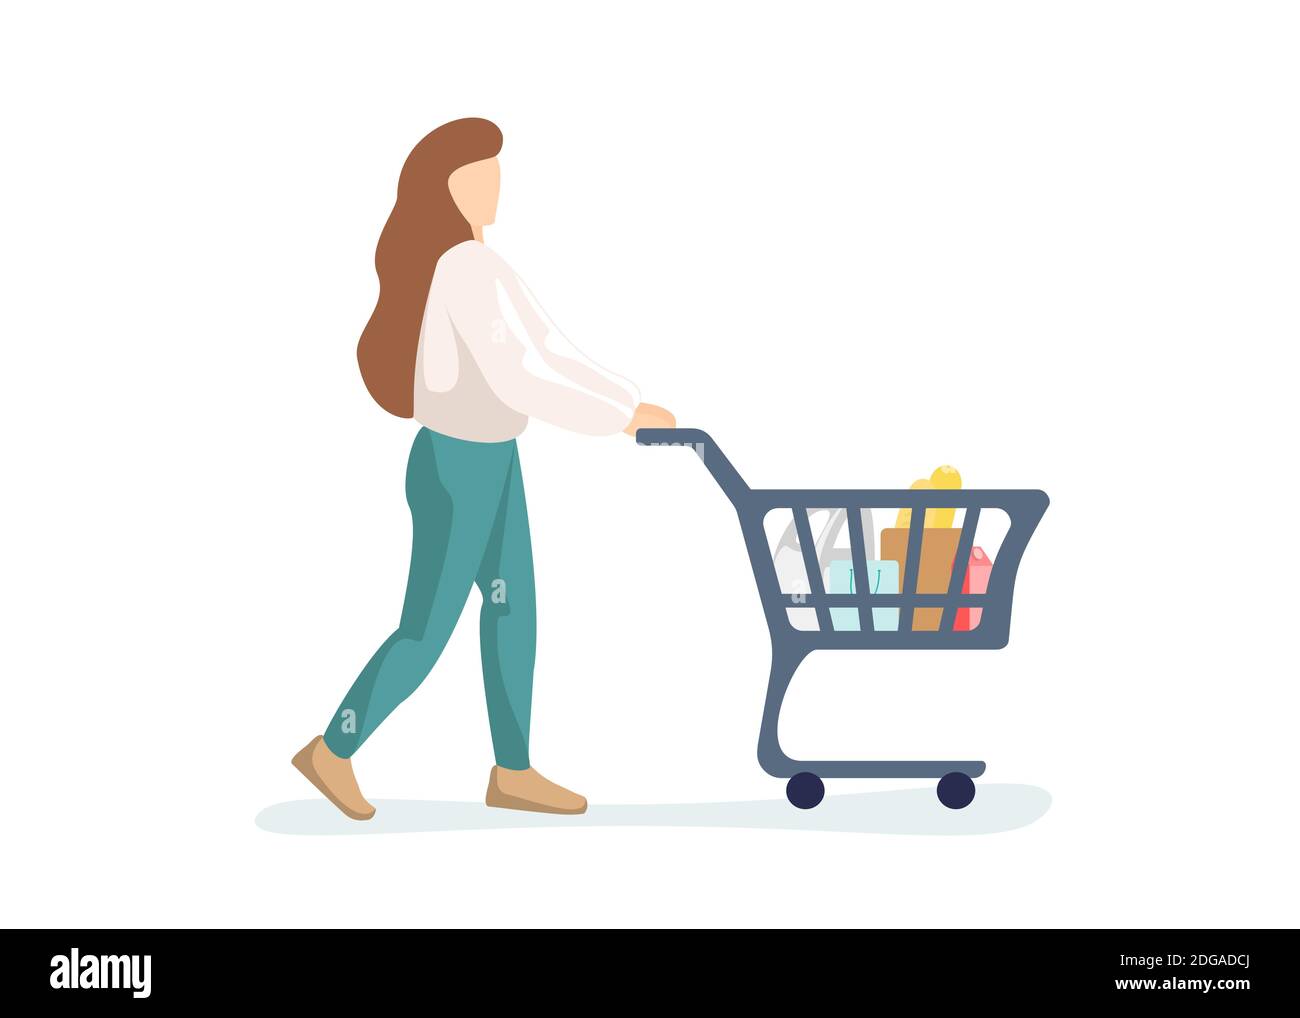 Young woman purchaser carrying supermarket shopping cart full of groceries. Female buyer pushing grocery store basket. Customer with products vector f Stock Vector